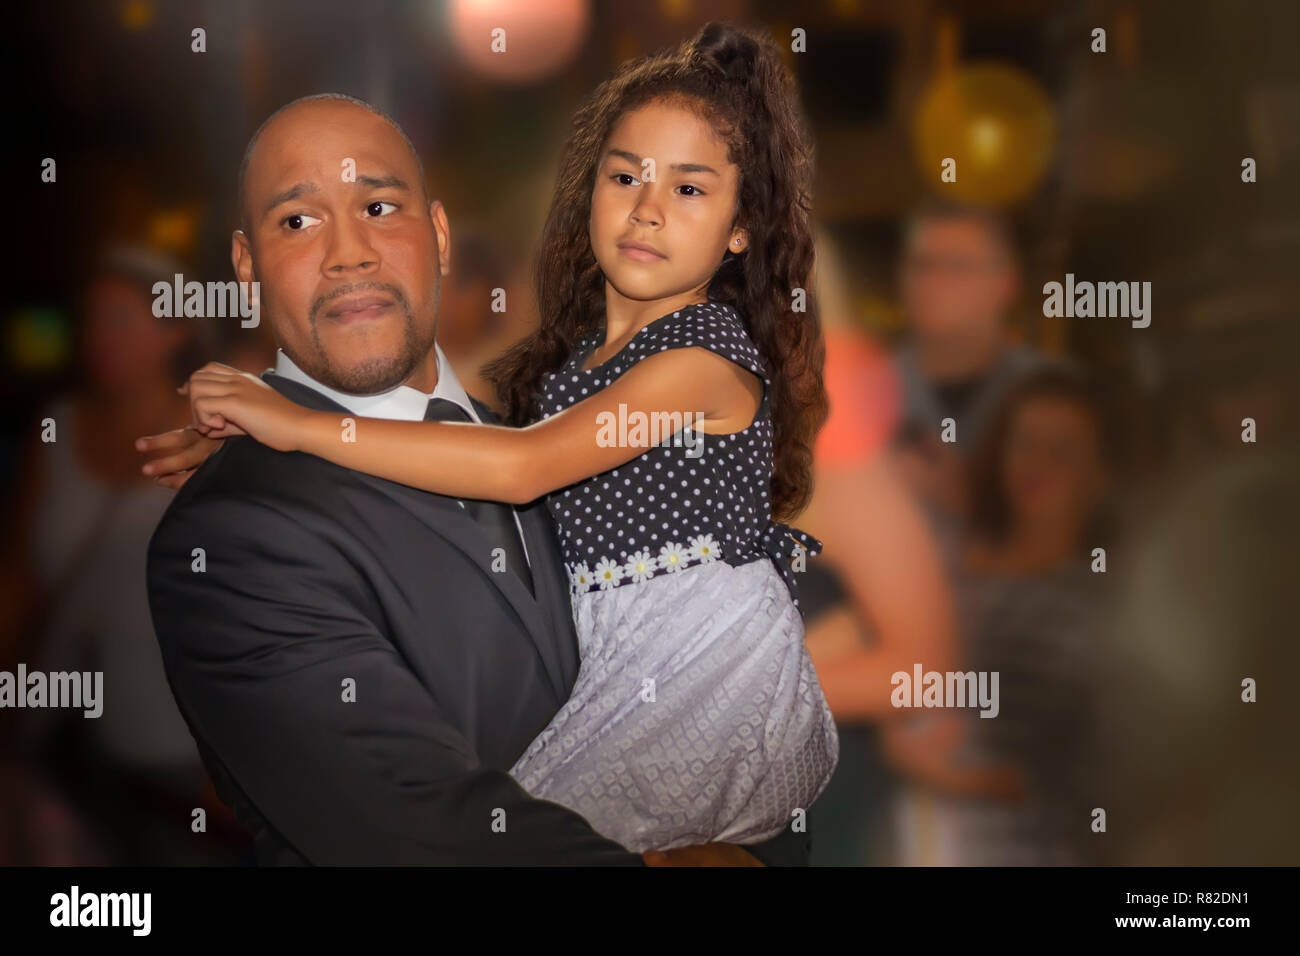 Father with a young daughter in his armsFather is wearing a black suit with a black tie and child has on a formal long neutral color dress. Stock Photo